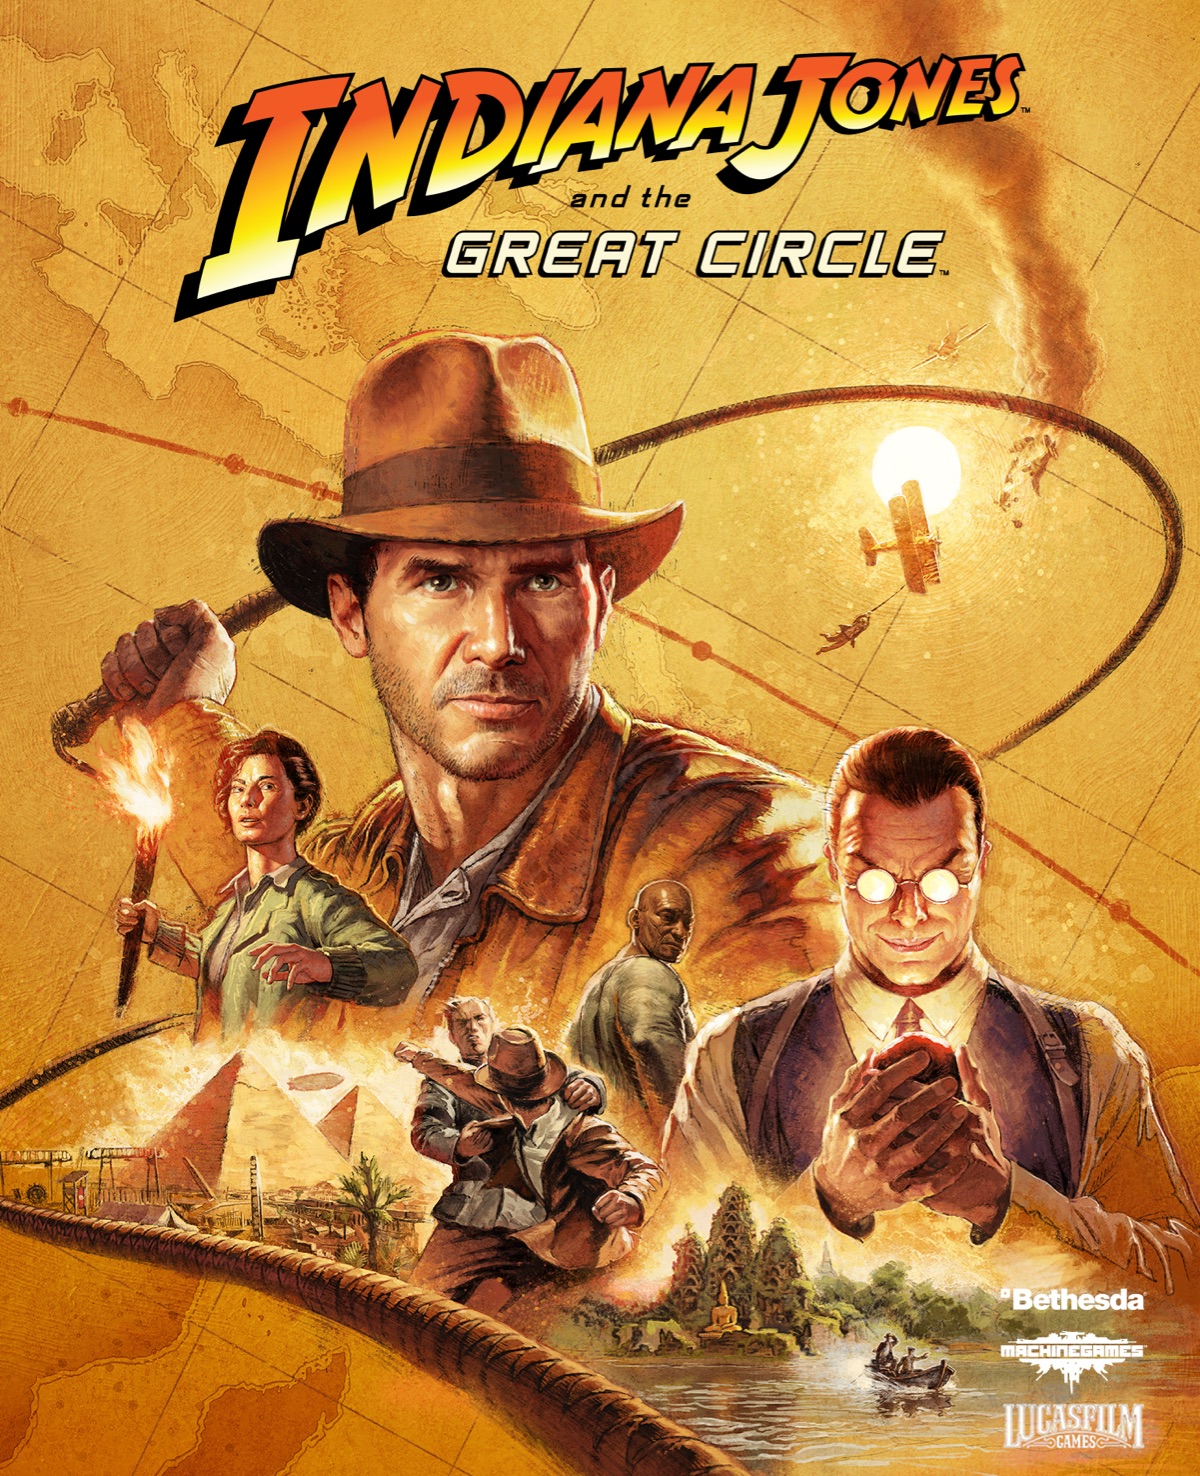 Indiana Jones 5 release date, cast, trailer and more